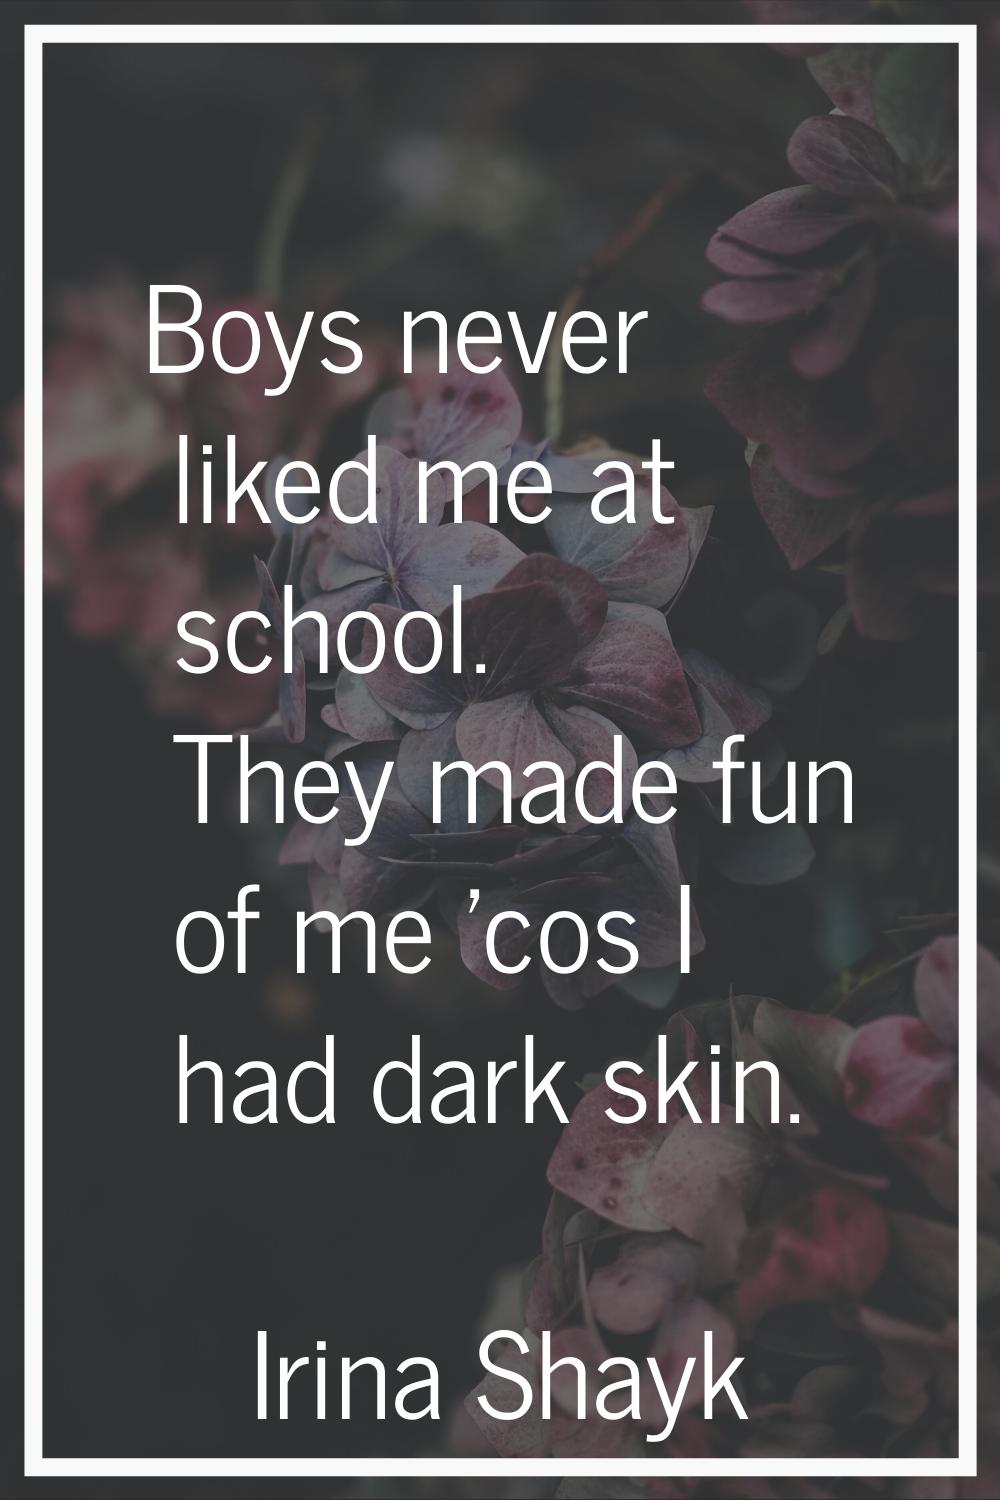 Boys never liked me at school. They made fun of me 'cos I had dark skin.